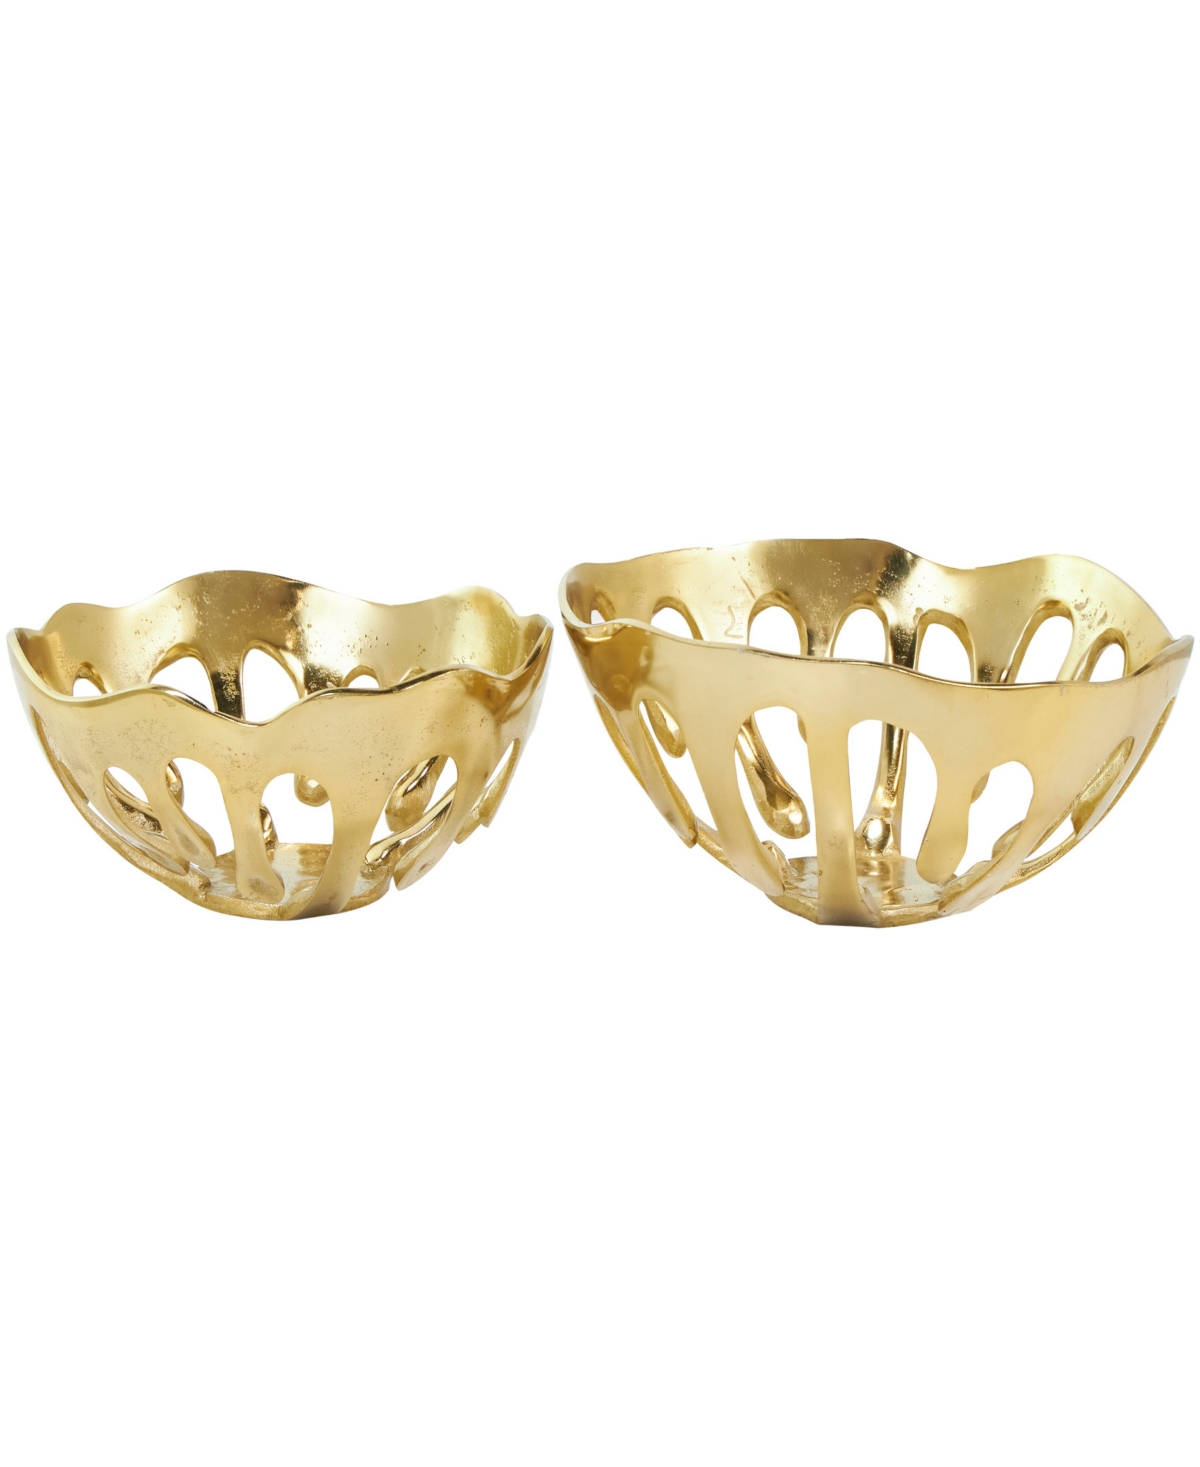 Rosemary Lane Aluminum Drip Decorative Bowl With Open Frame Design, Set Of 2 In Gold